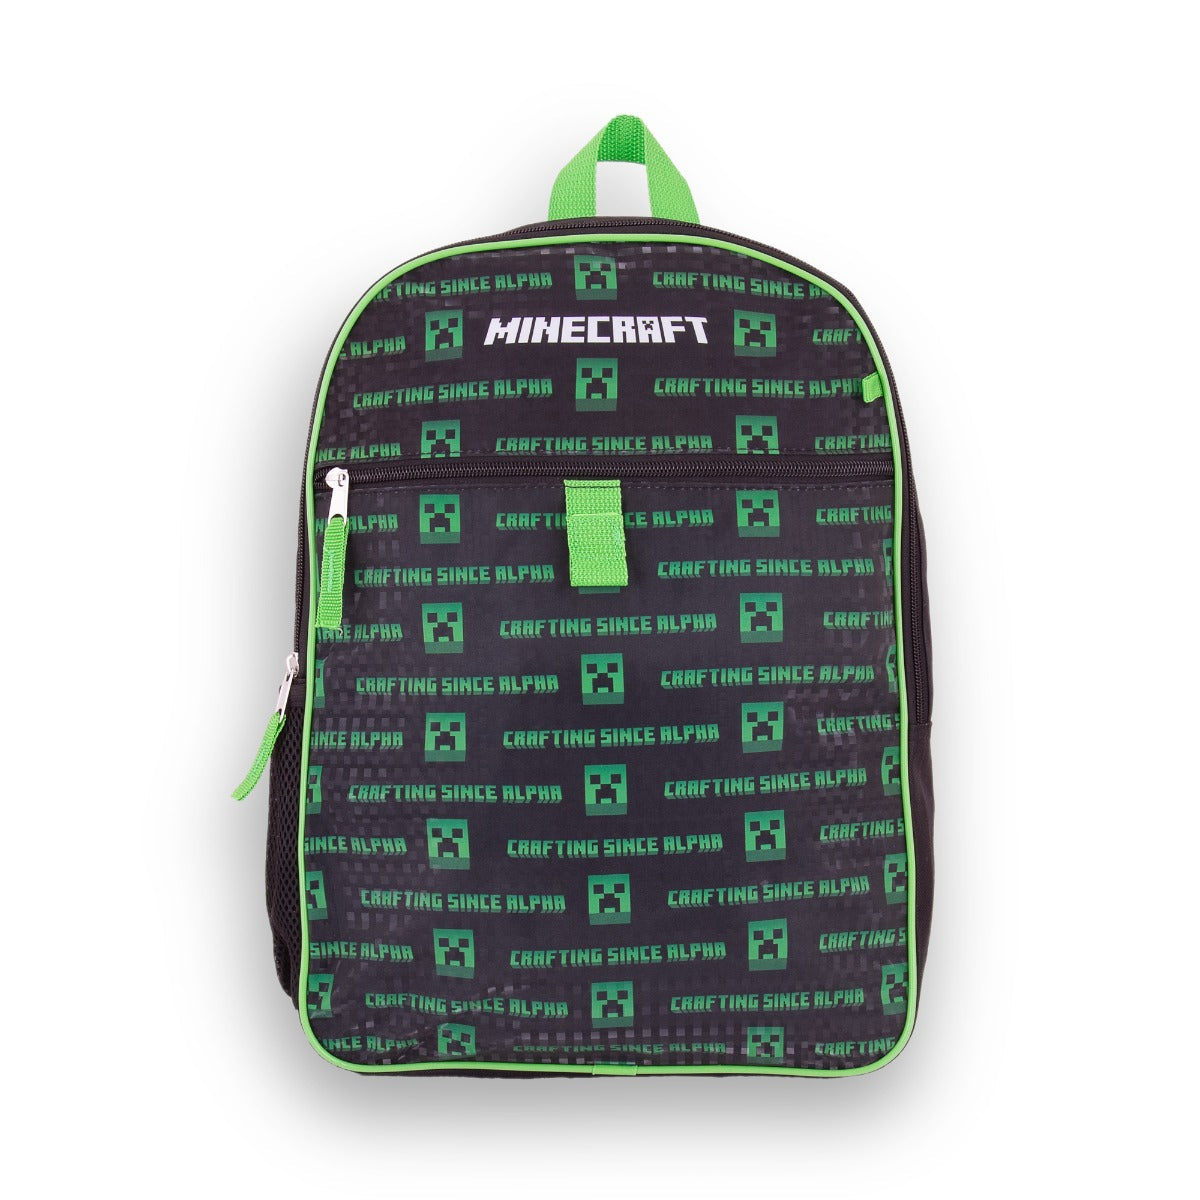 Minecraft Crafting Since Alpha Creeper 5 Piece Backpack Set